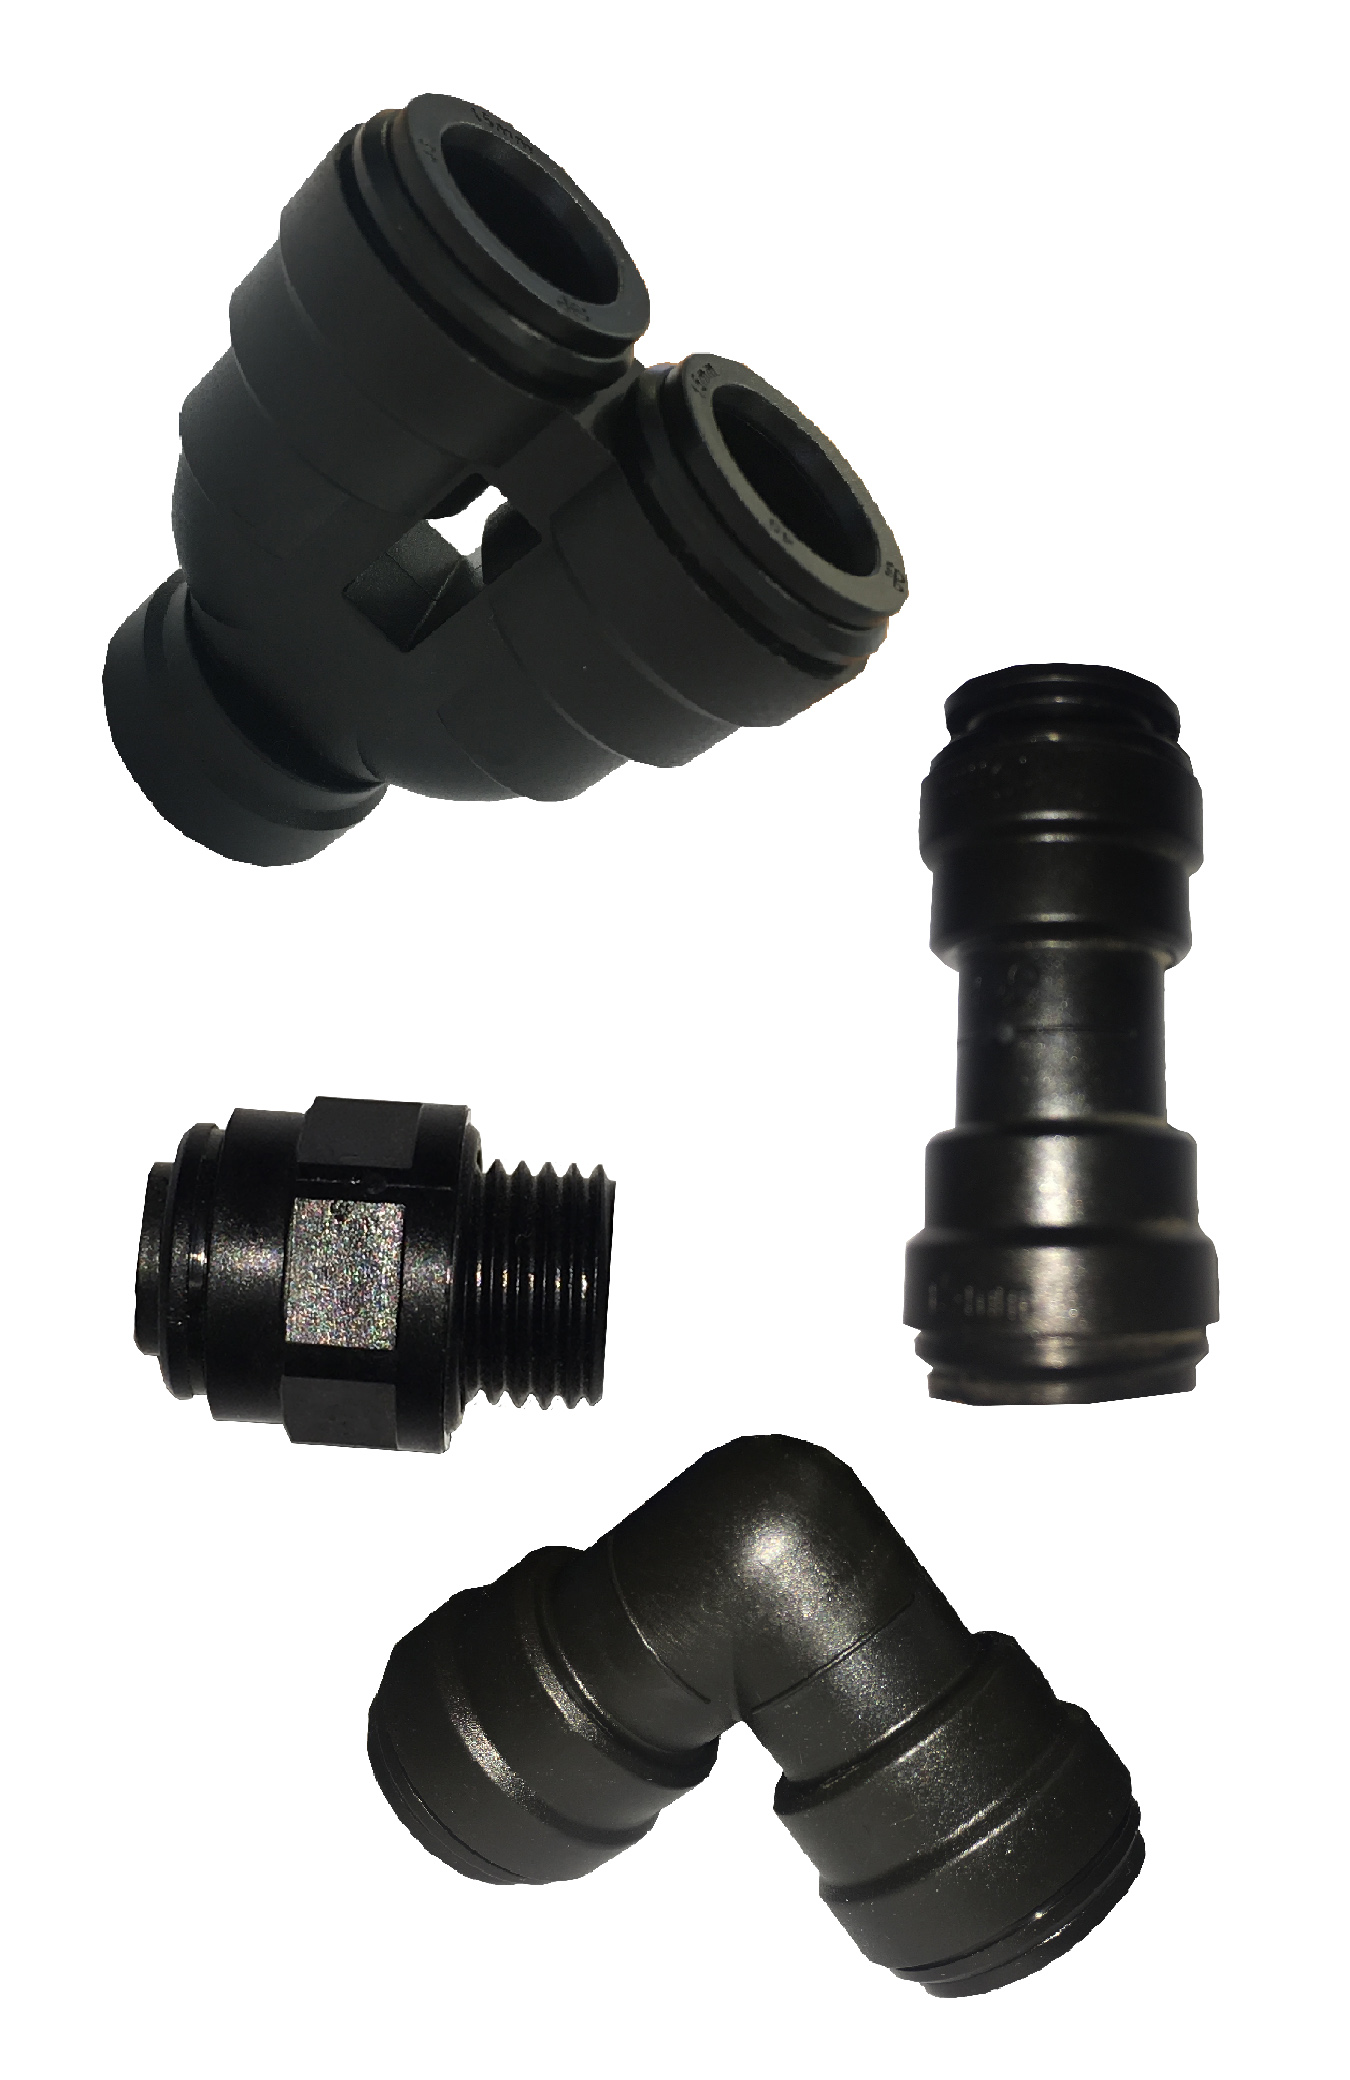 Tube to Hose Fittings